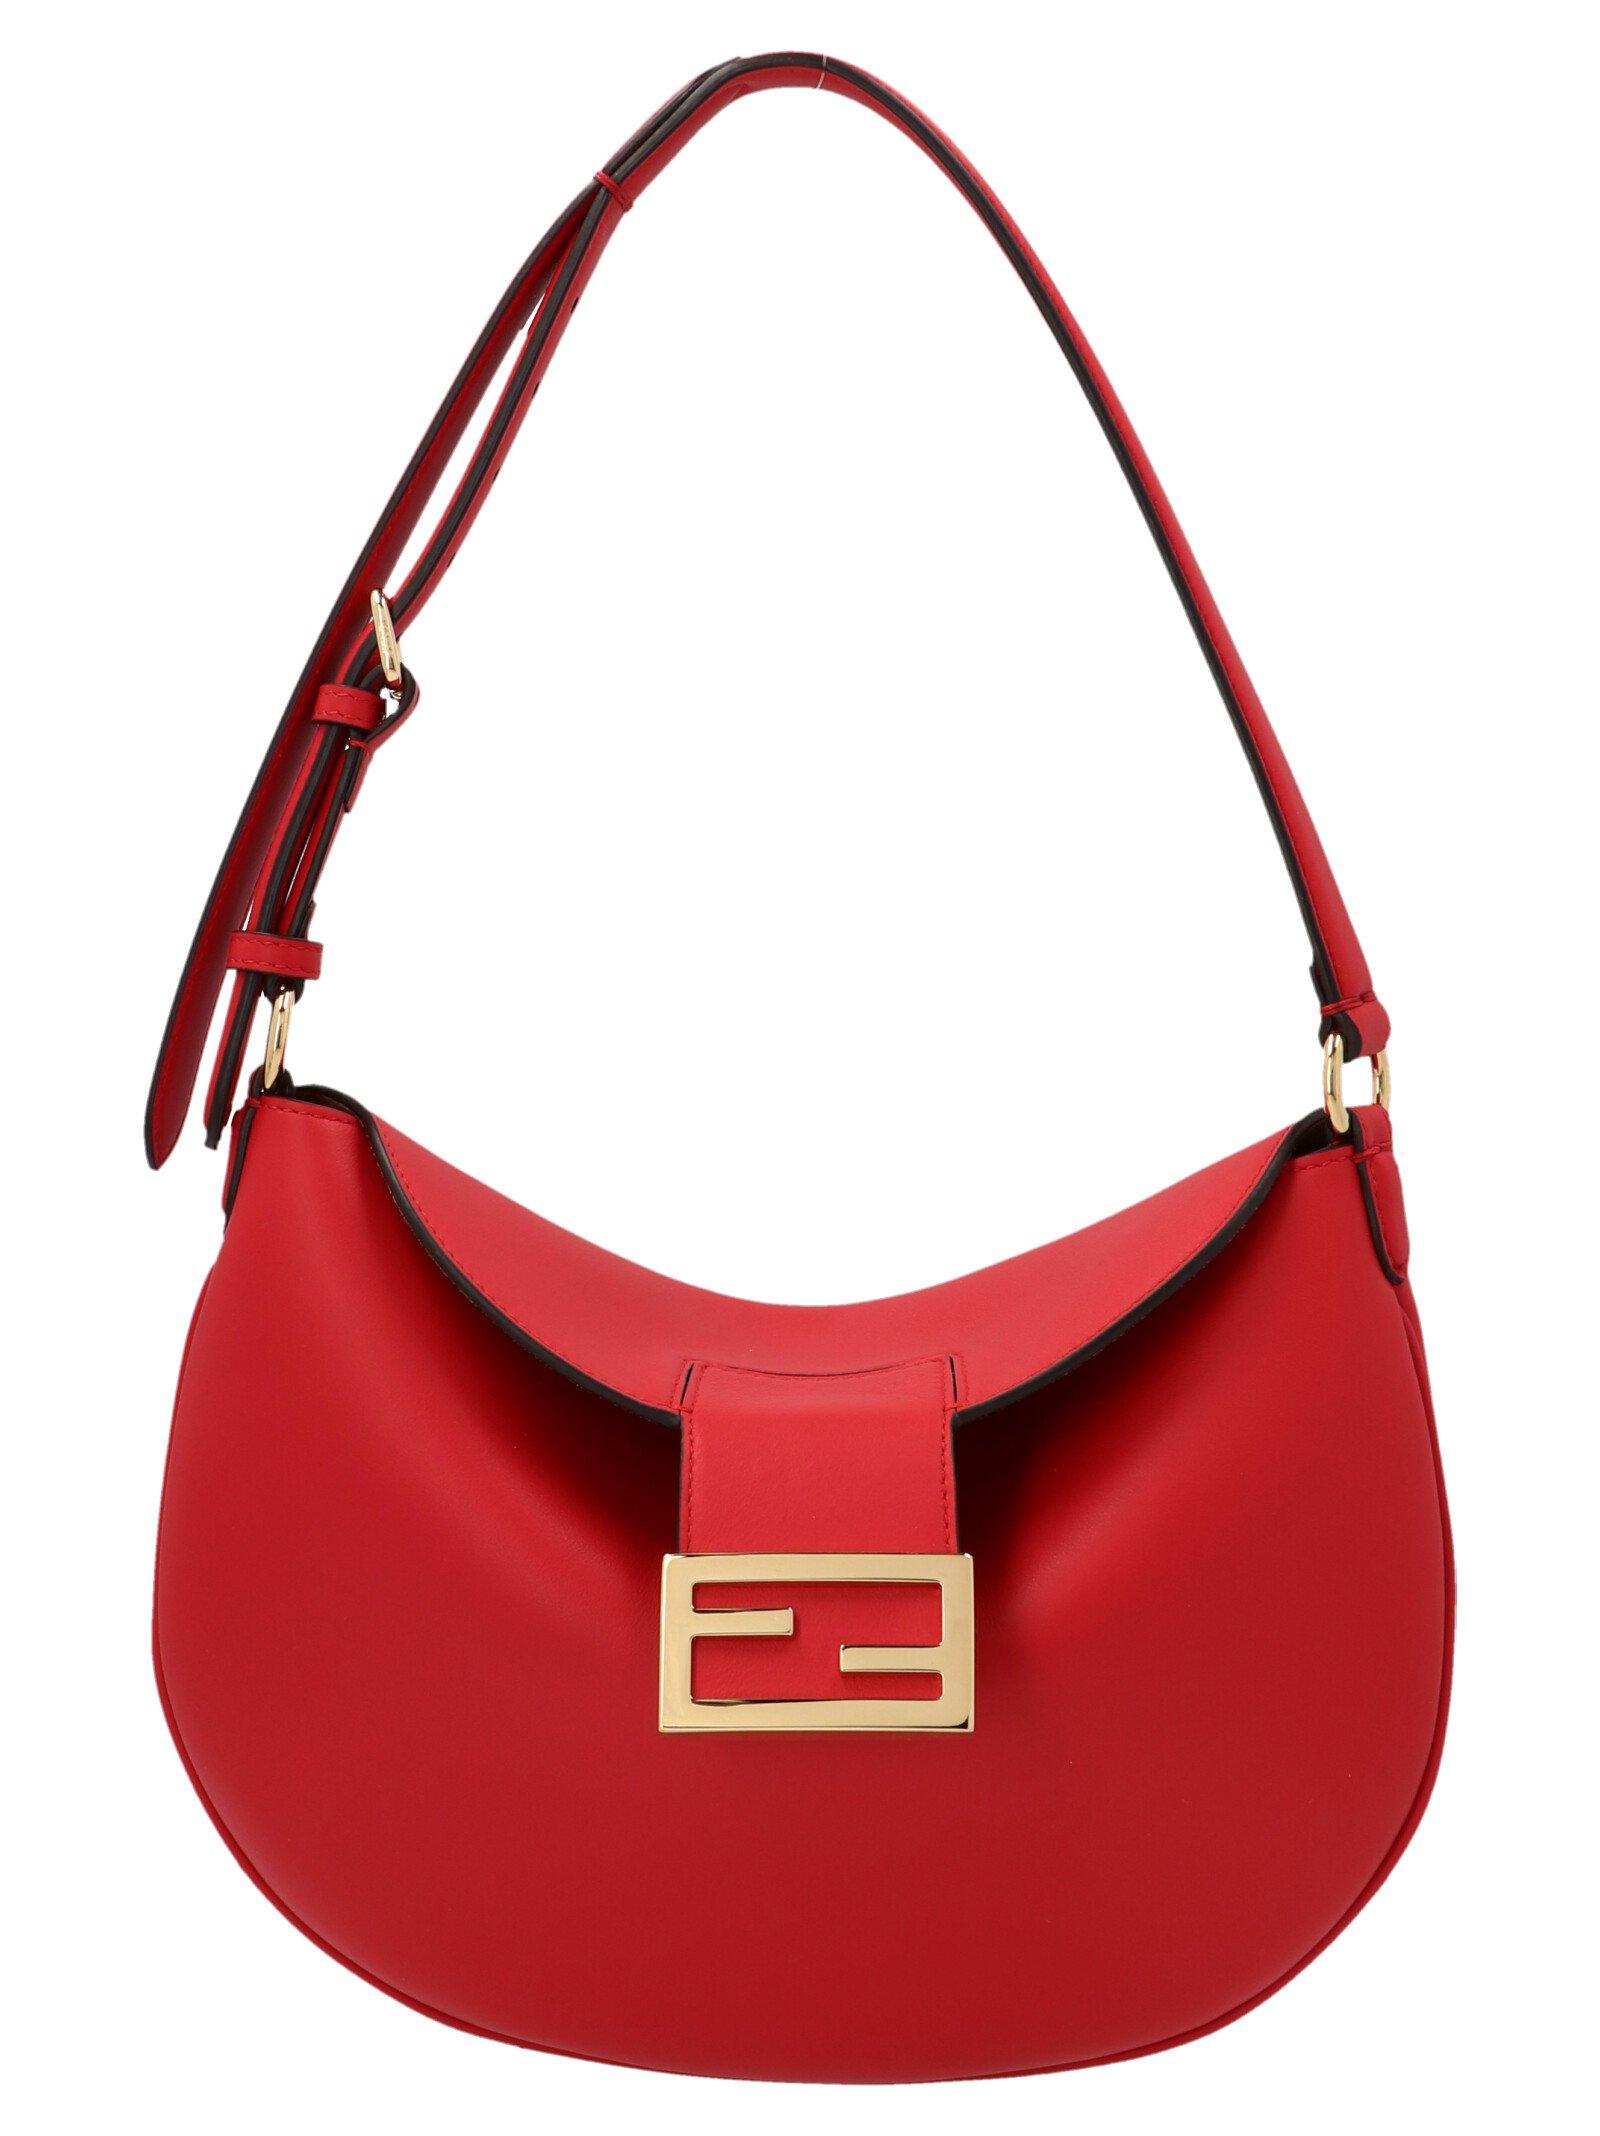 Fendi Leather Croissant Small Shoulder Bag in Red - Lyst